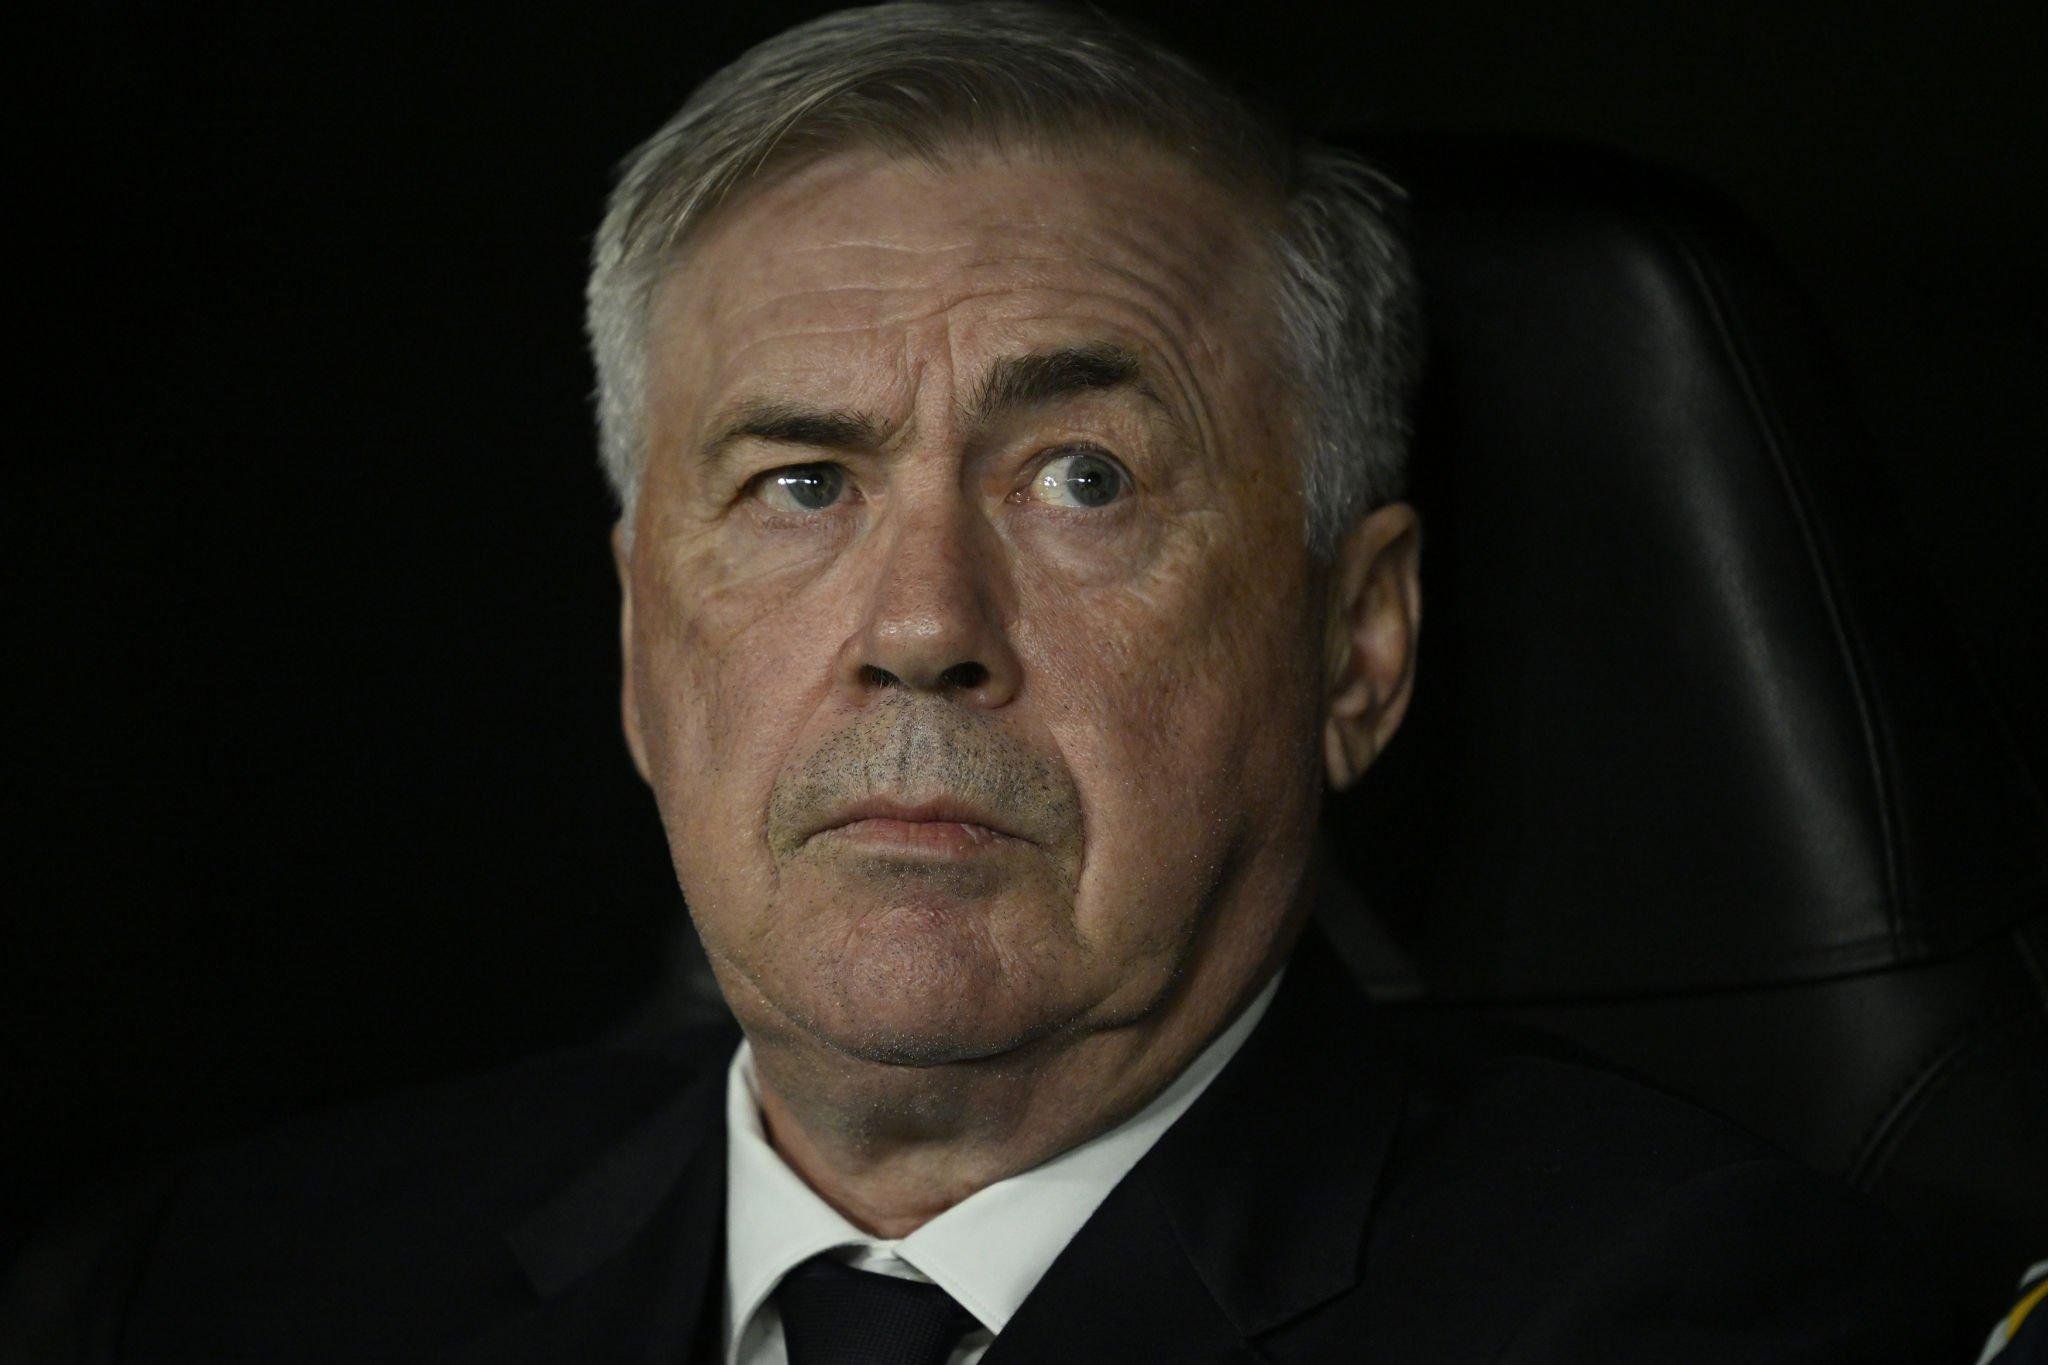 Real Madrid manager Carlo Ancelotti explains tactical masterstroke against Atletico Madrid – “We preferred him”